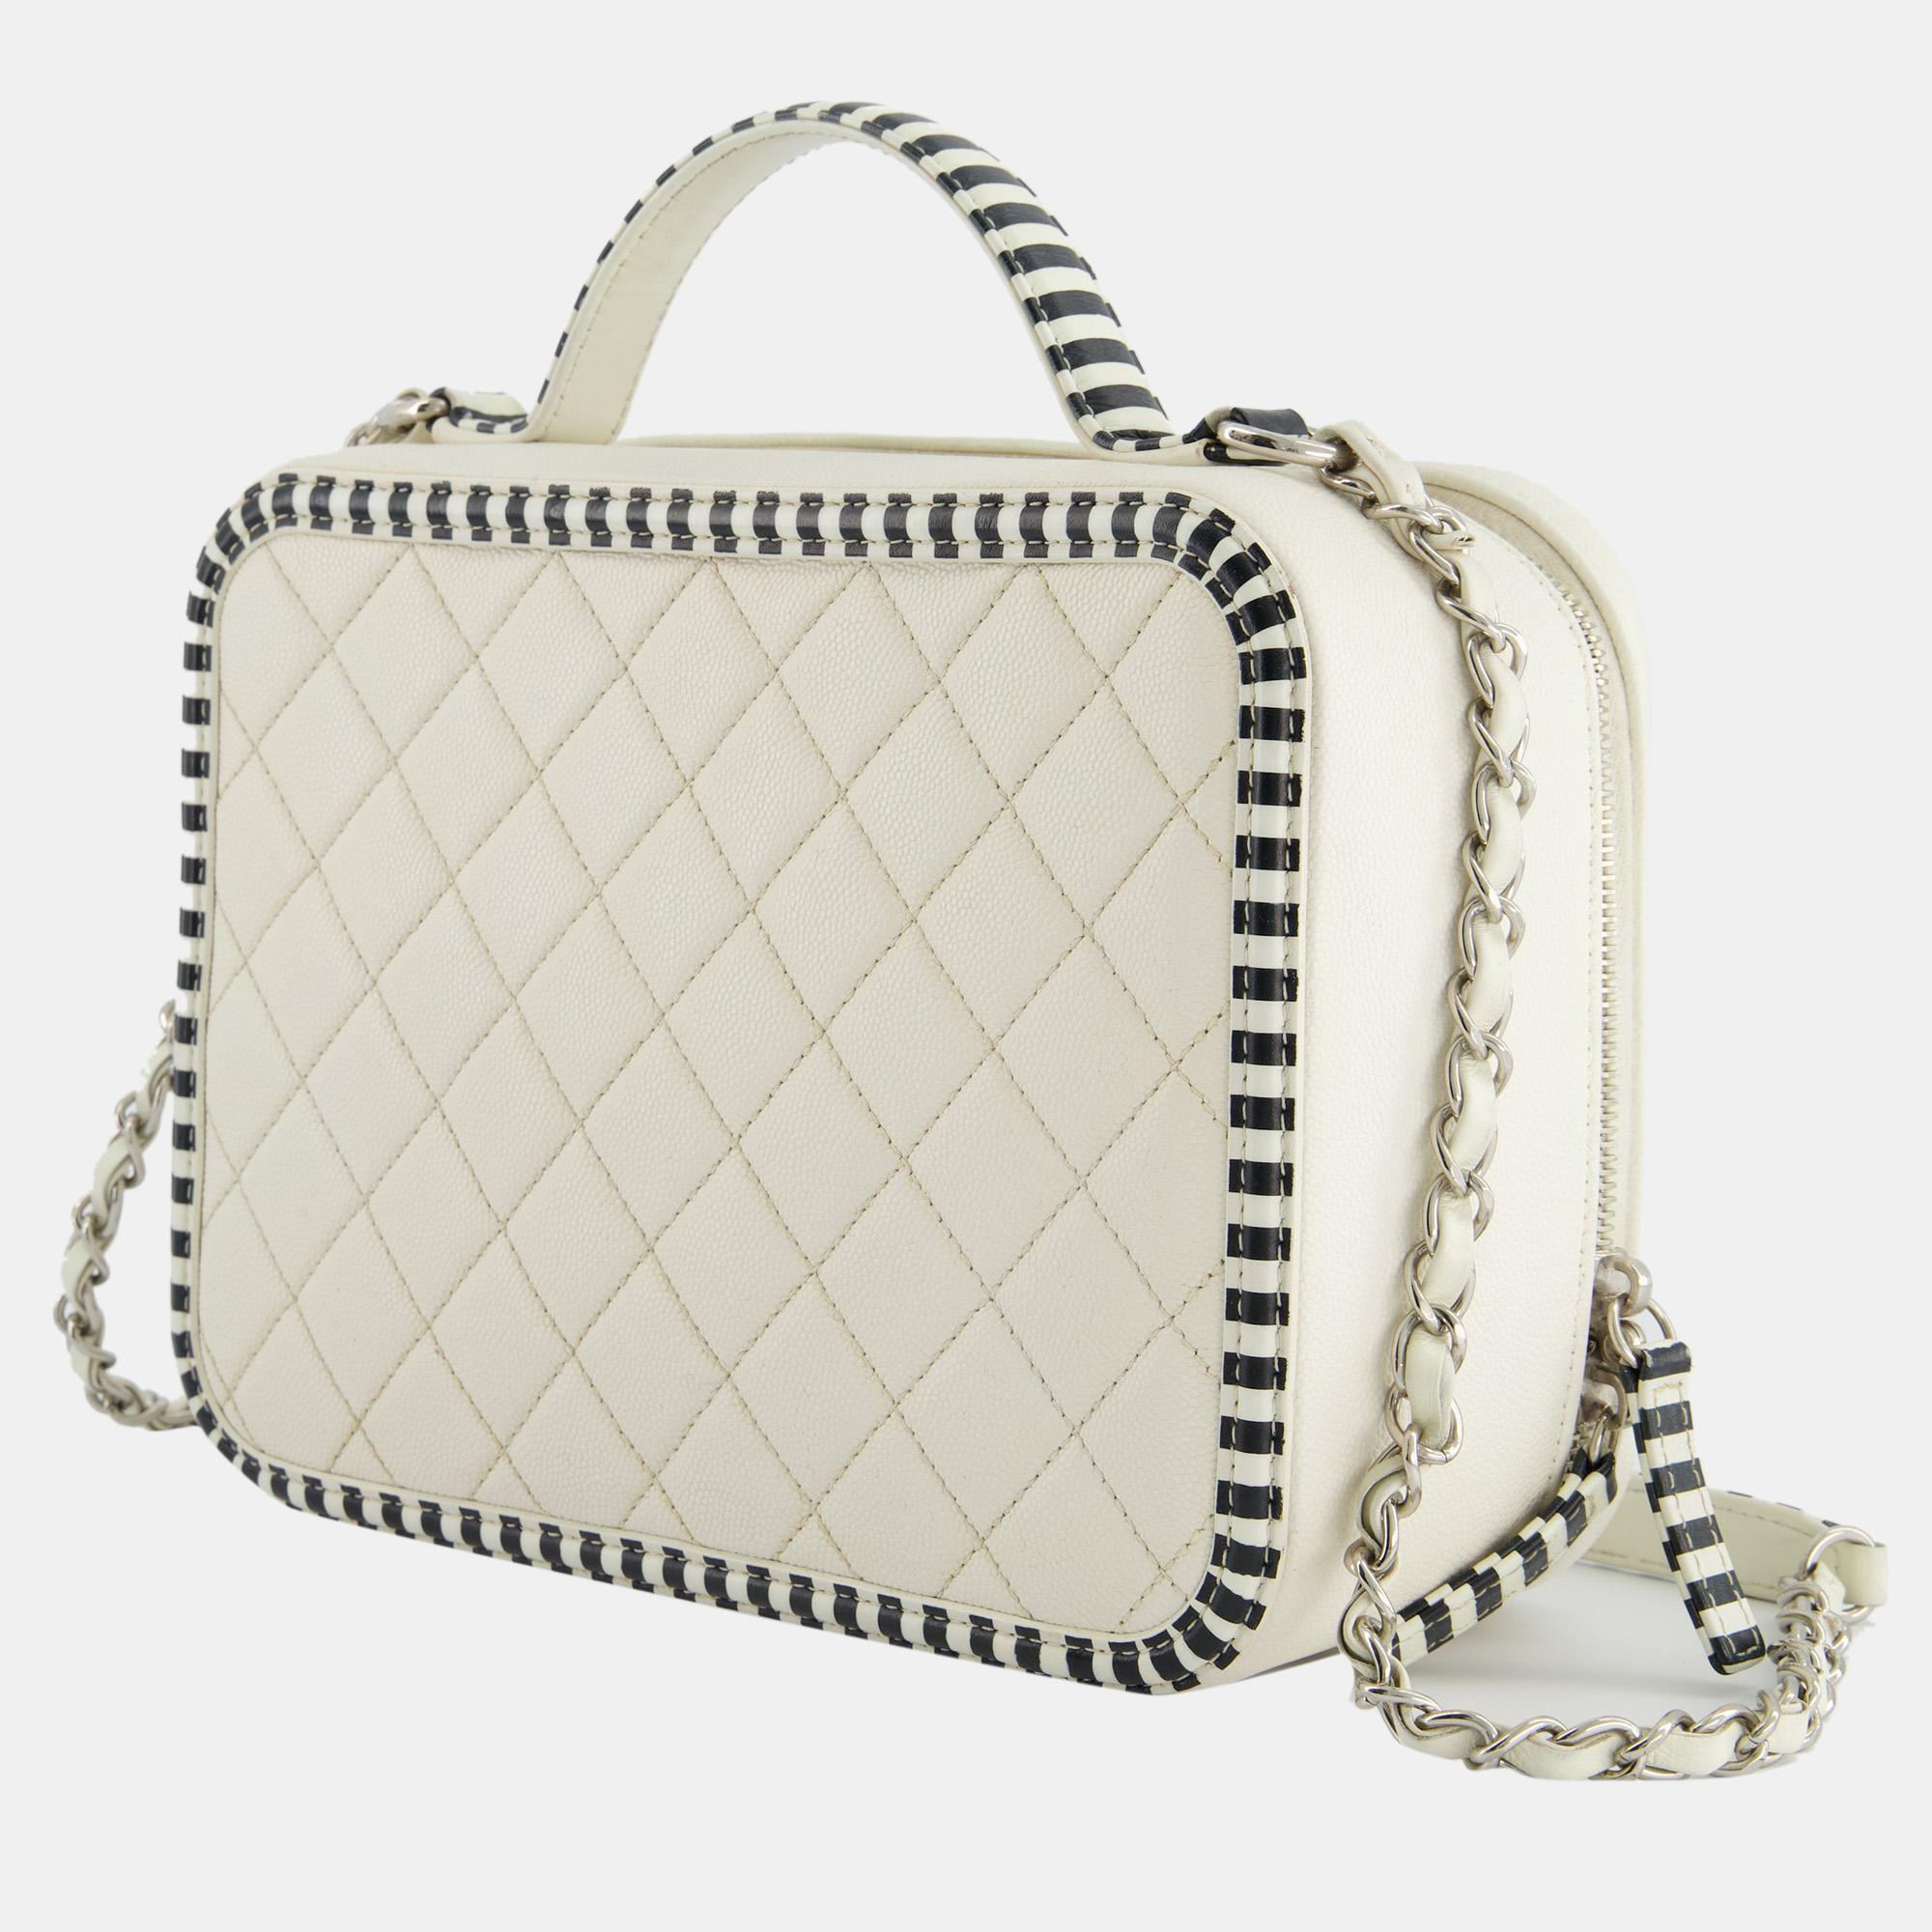 Chanel White Caviar Vanity Case With Zebra Motif CC Logo And Silver Hardware